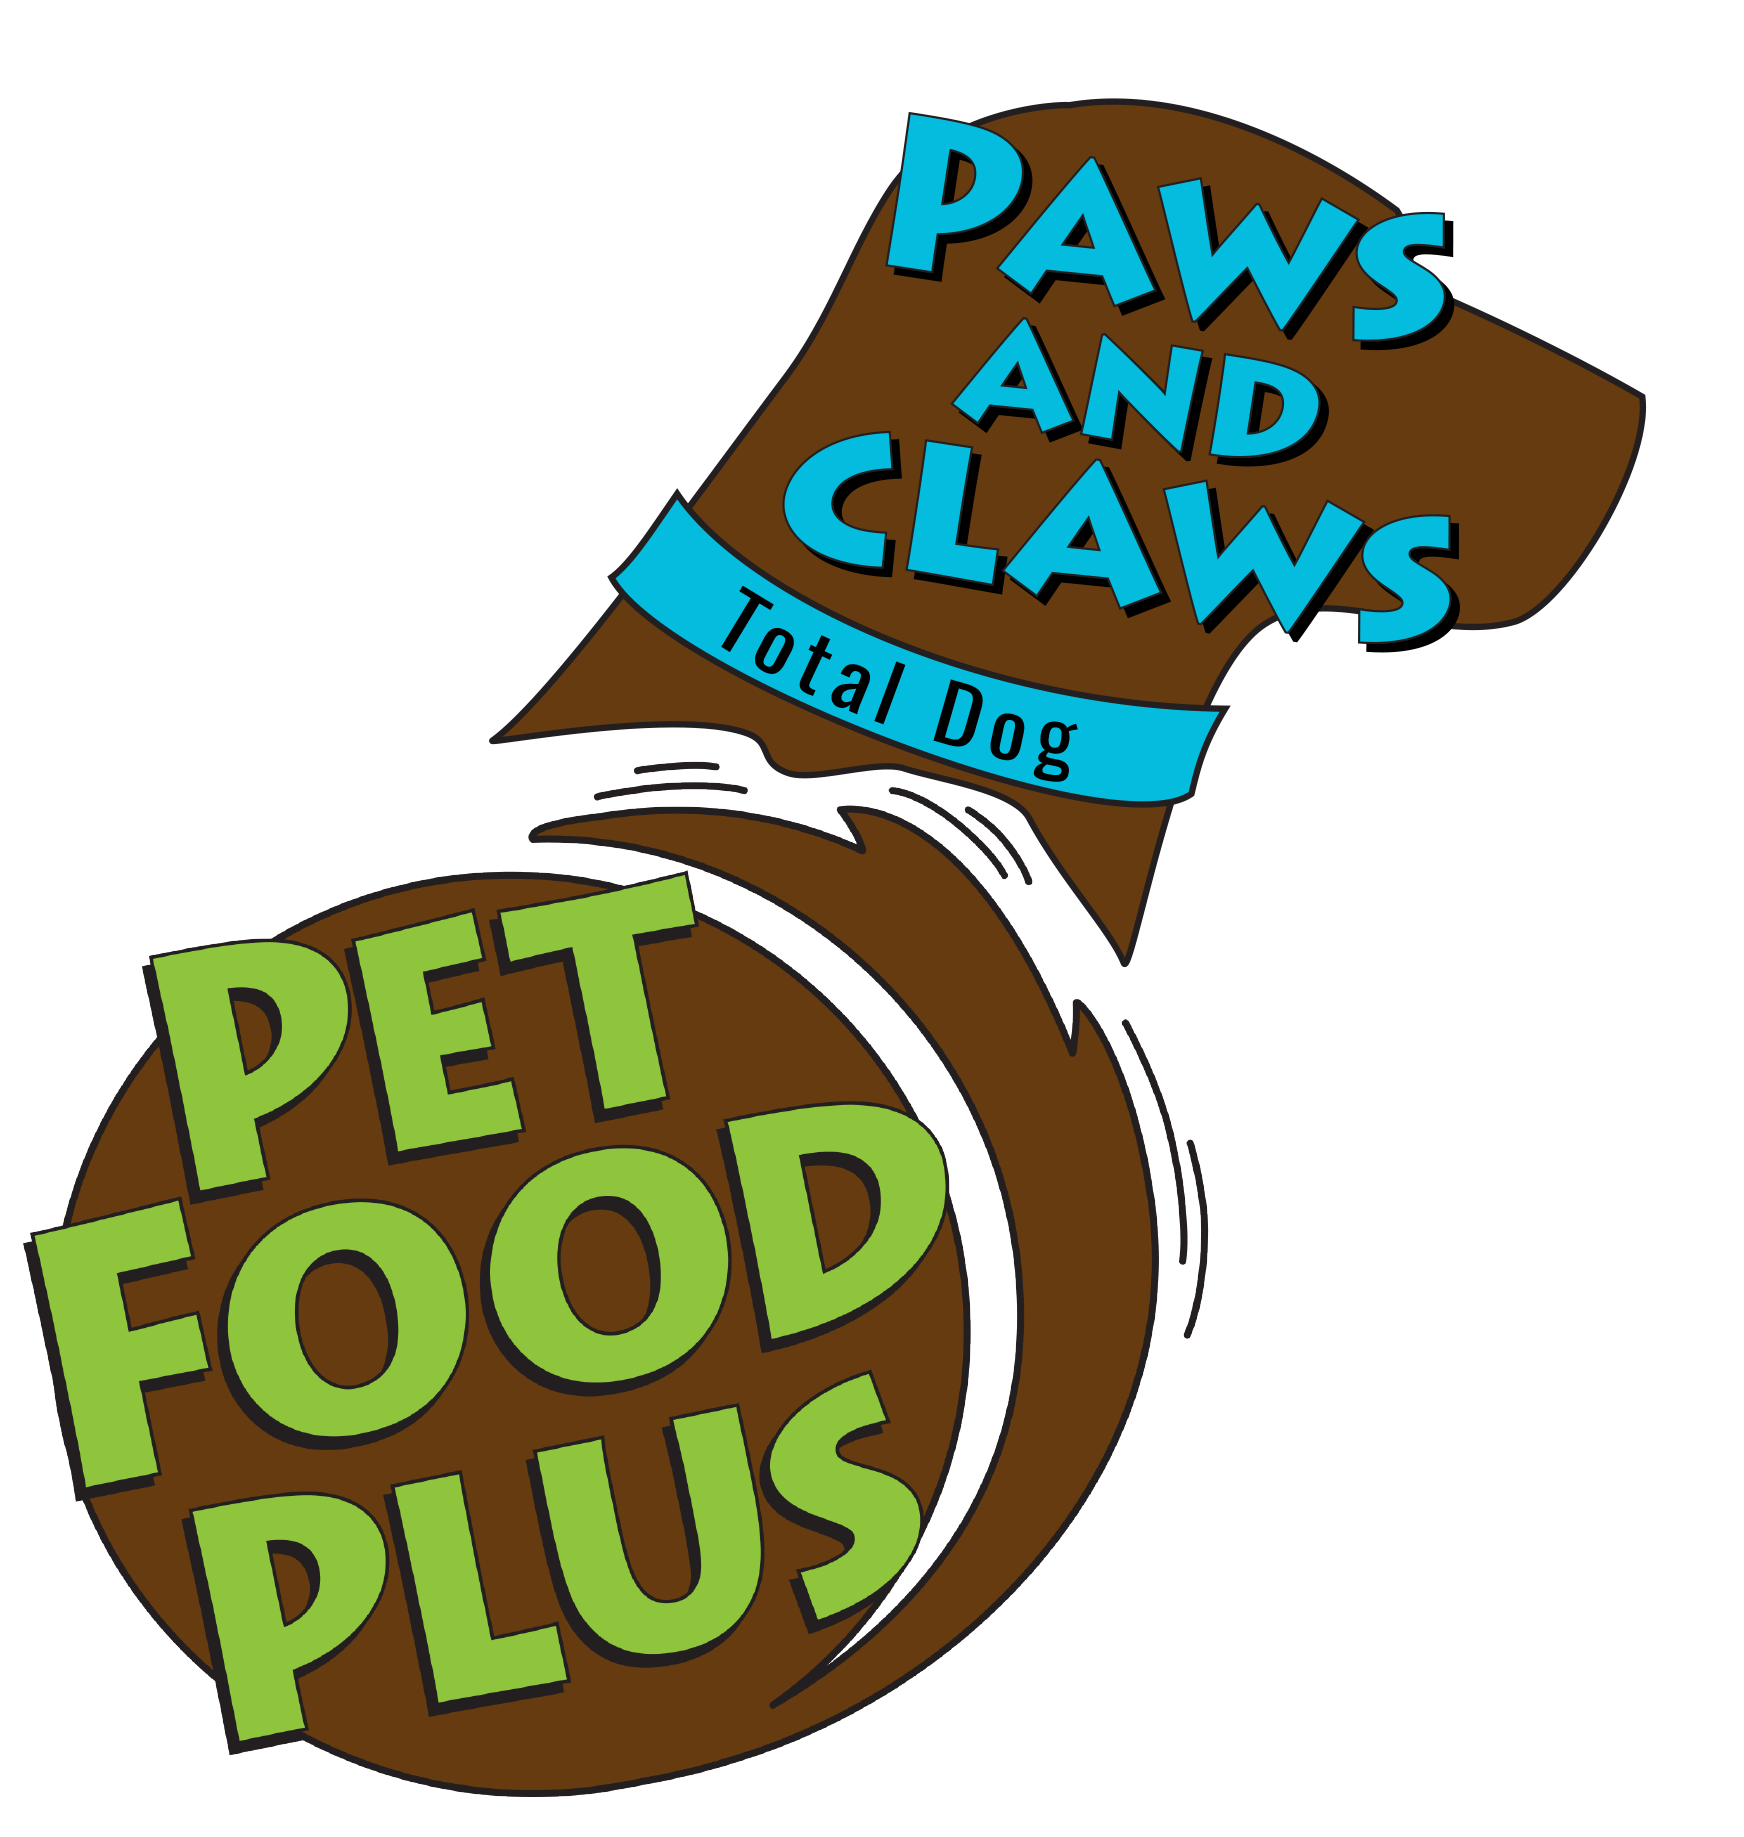 Paws and Claws Total Dog & Pet Food Plus